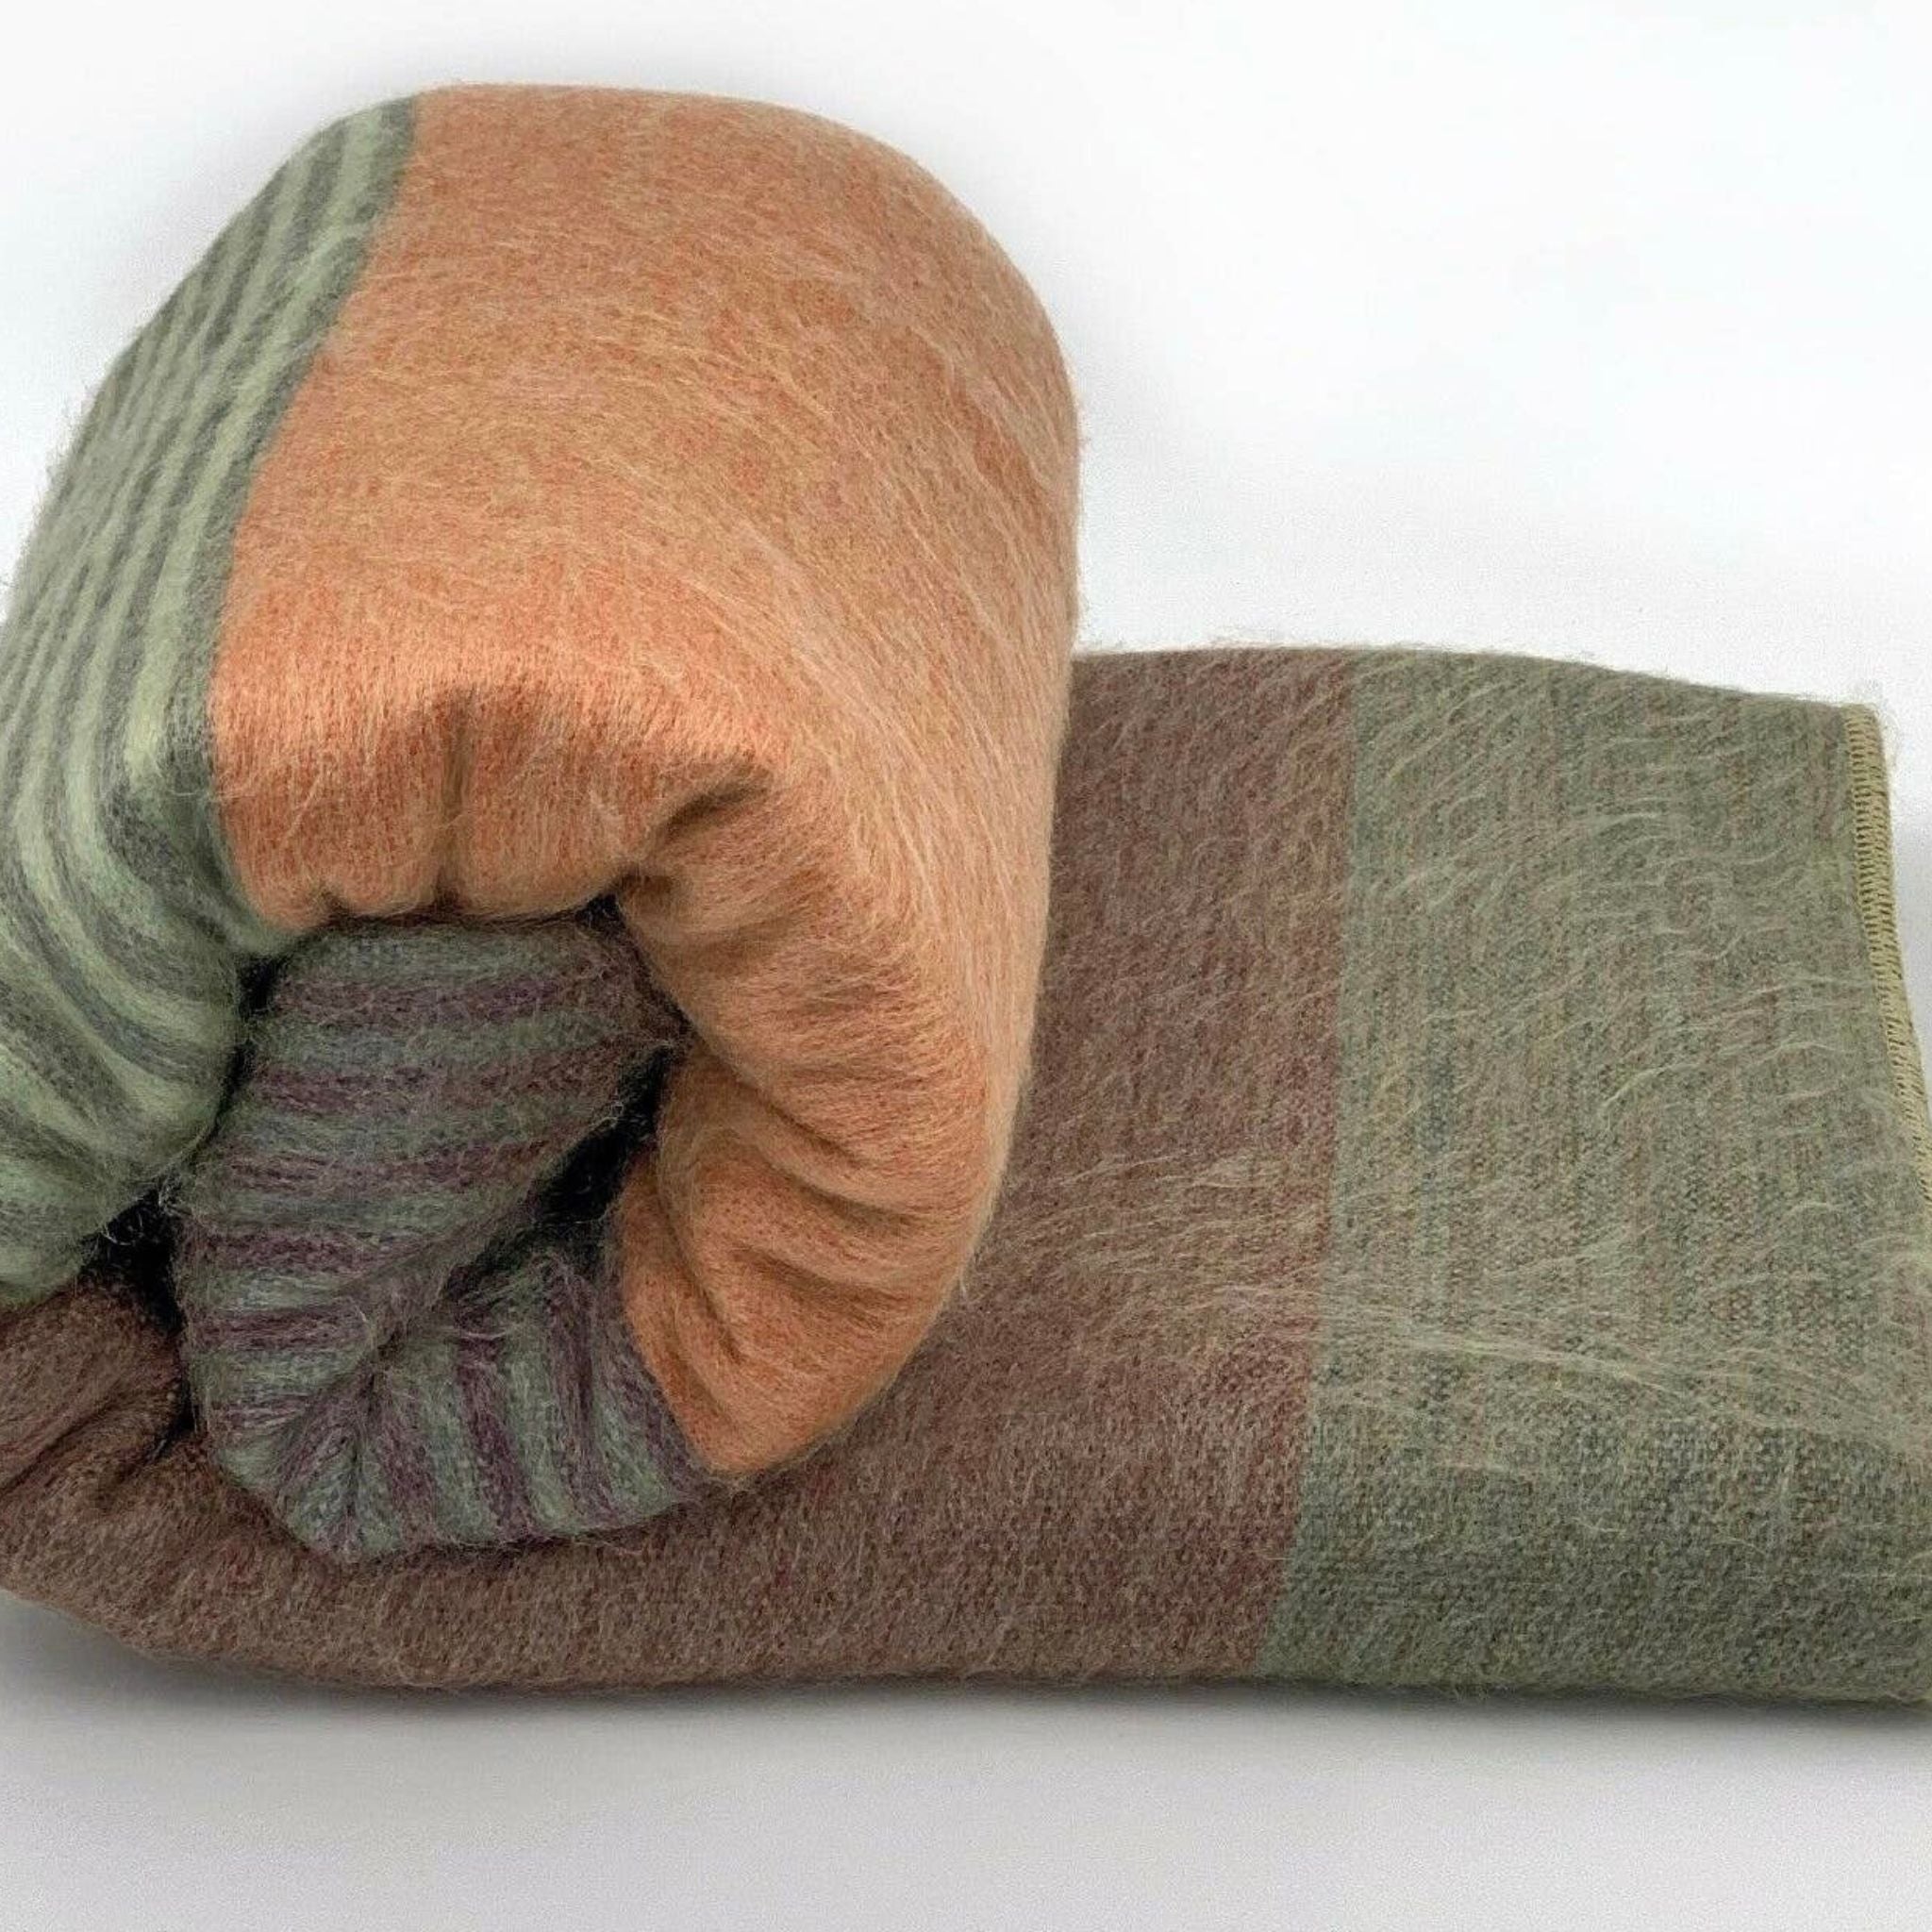 EDEN THROW BLANKET - Simply Elevated Home Furnishings 